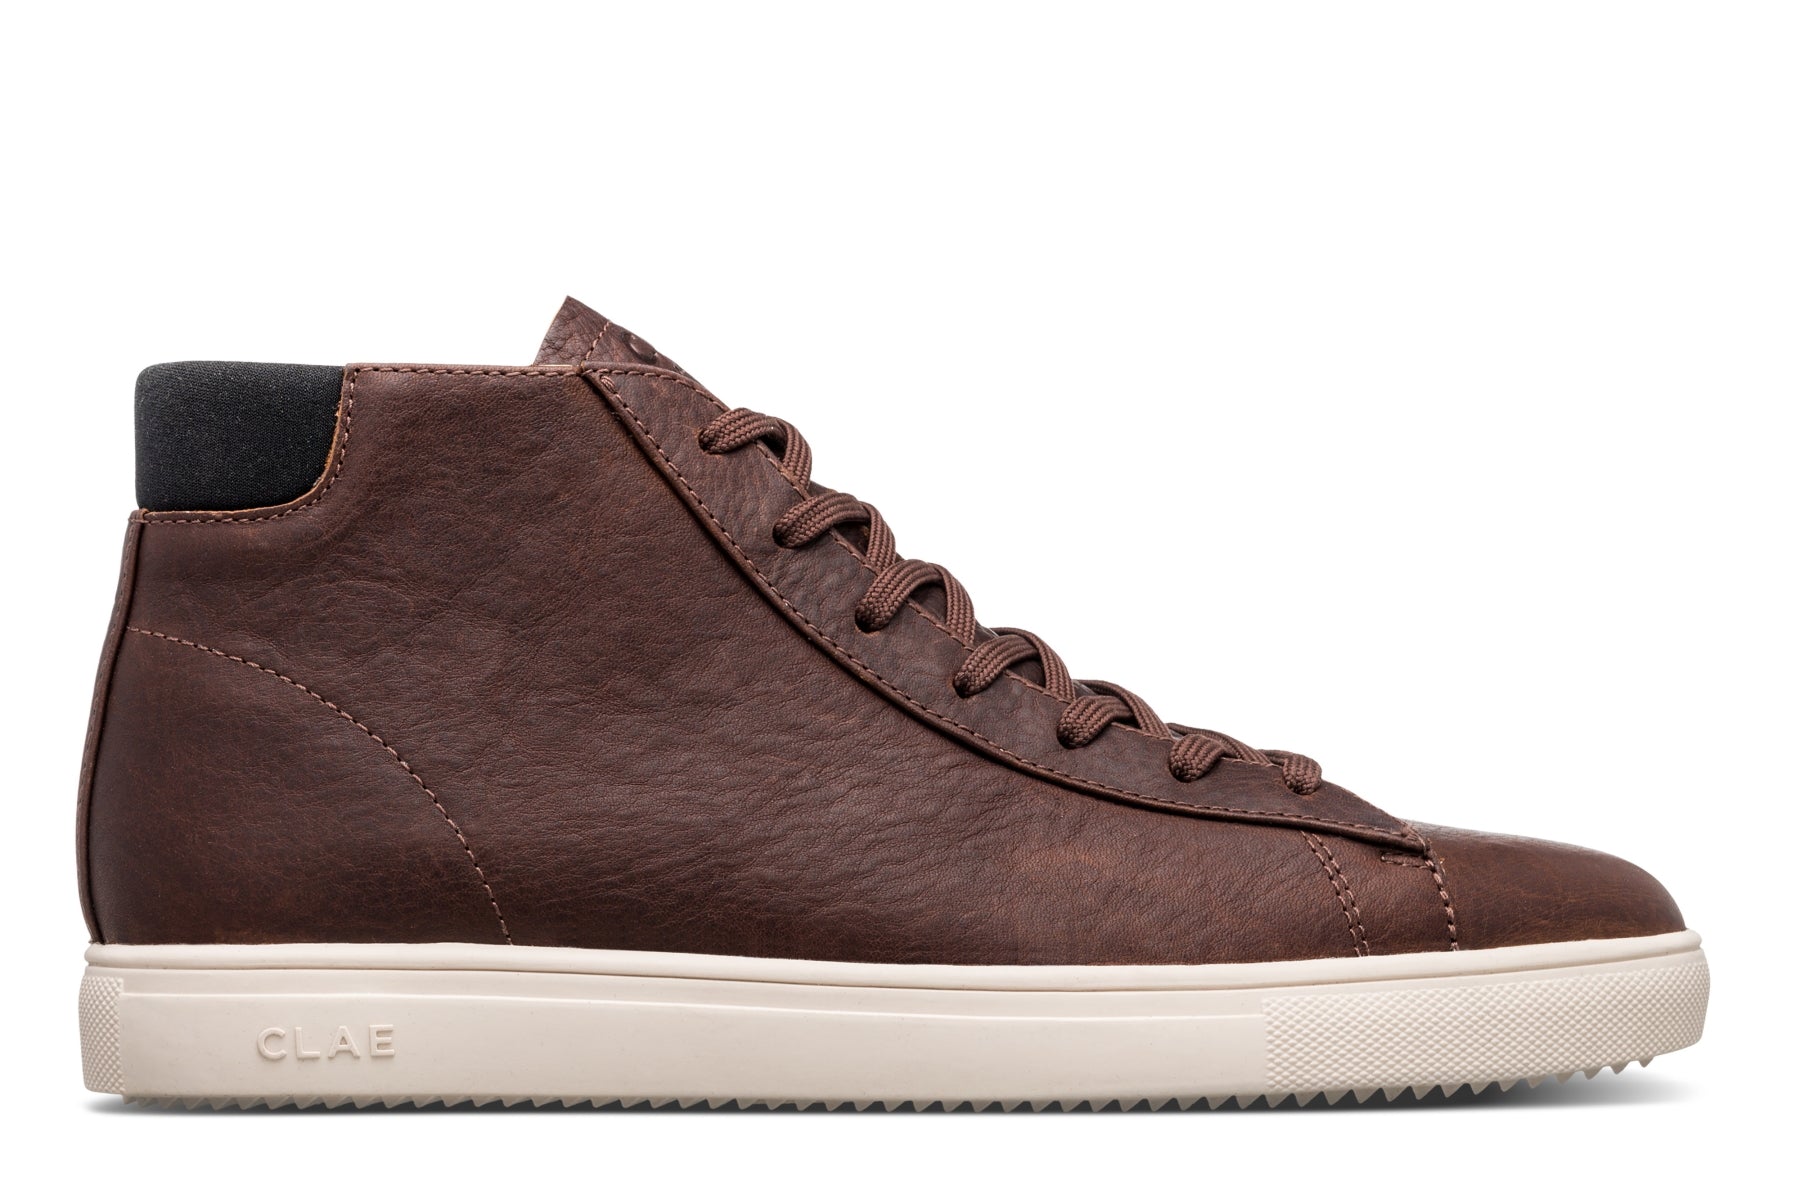 CLAE Bradley Mid Cocoa Oiled Leather Sneakers – Company